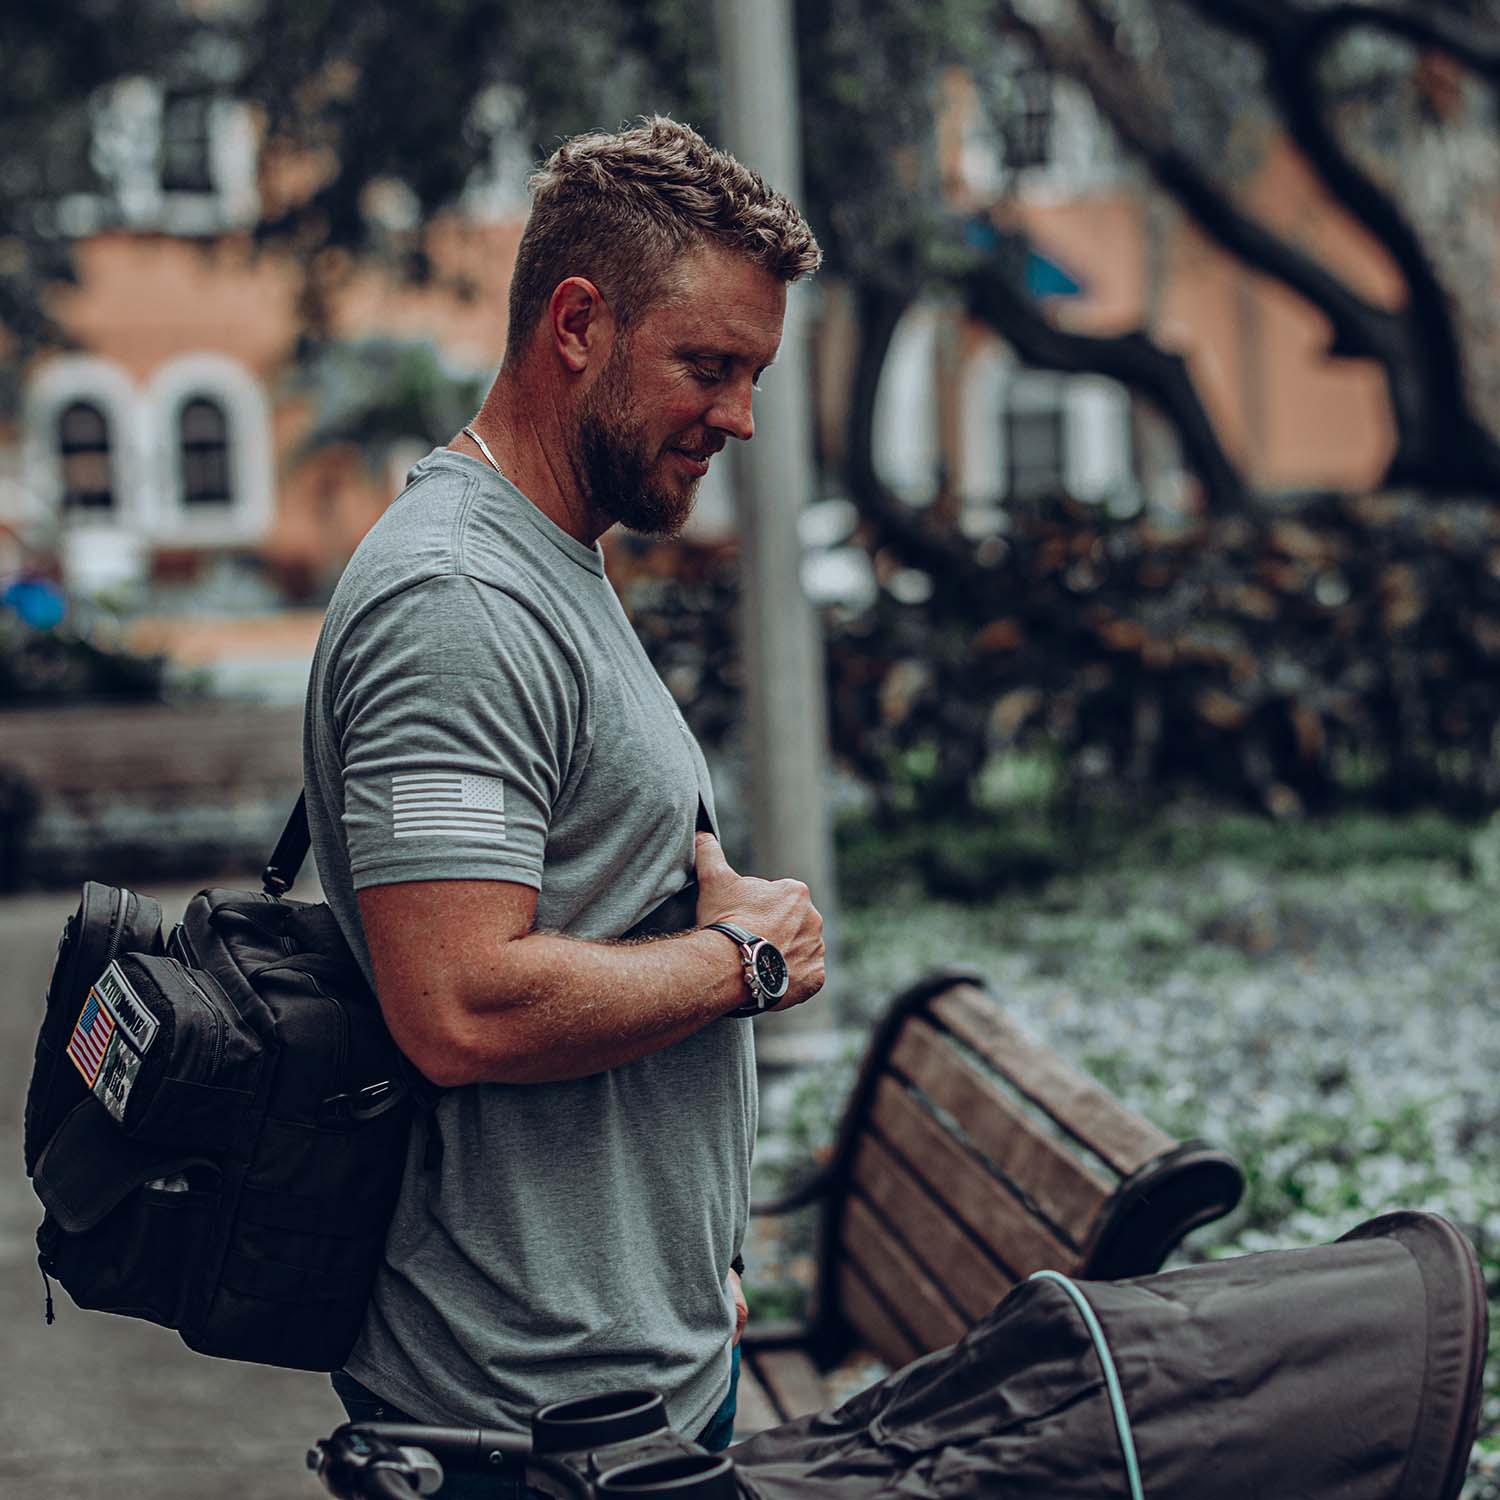 New Dads  How to Nail Your Dad Bag  Carryology  Exploring better ways  to carry